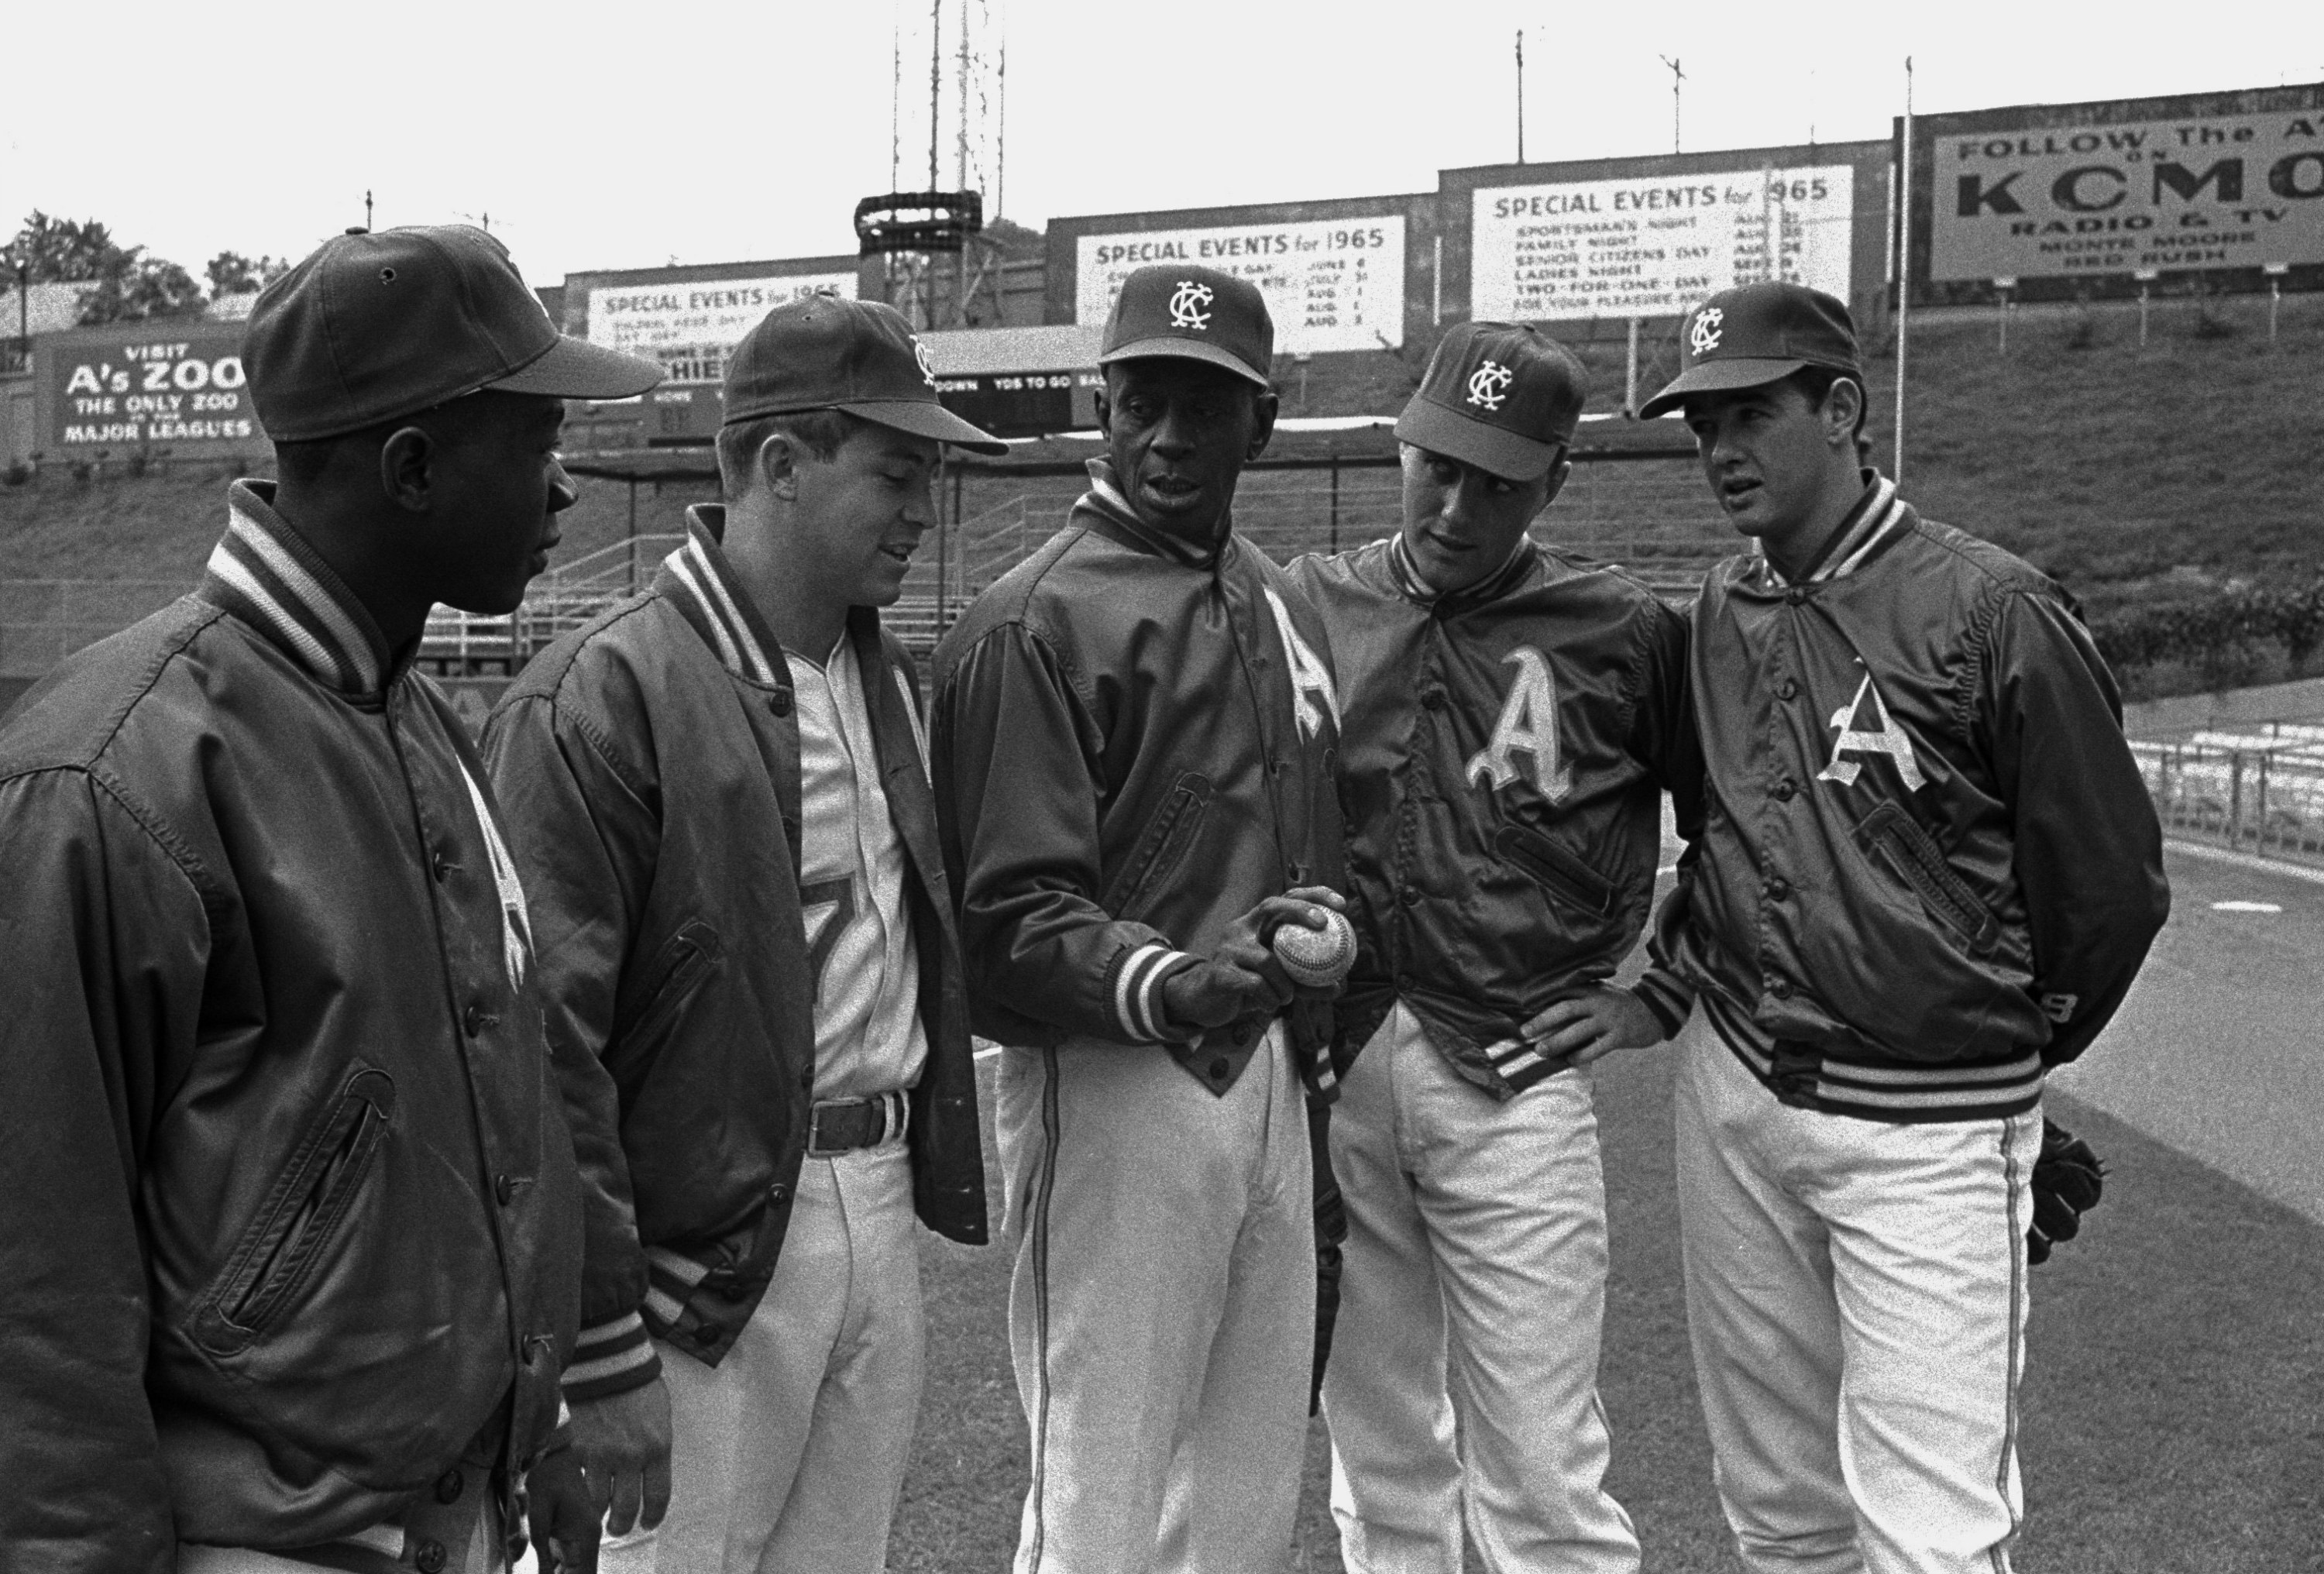 Satchel Paige (C) demonstrates his technique to four Kansas City rookie pitchers, (l-r) John Odom, Jim Hunter, Dick Joyce, and Ron Tompkins, on Sept. 24, 1965. The youngsters are part of the A's youth movement, a development the Athletics management hopes will pay off in a pennant.